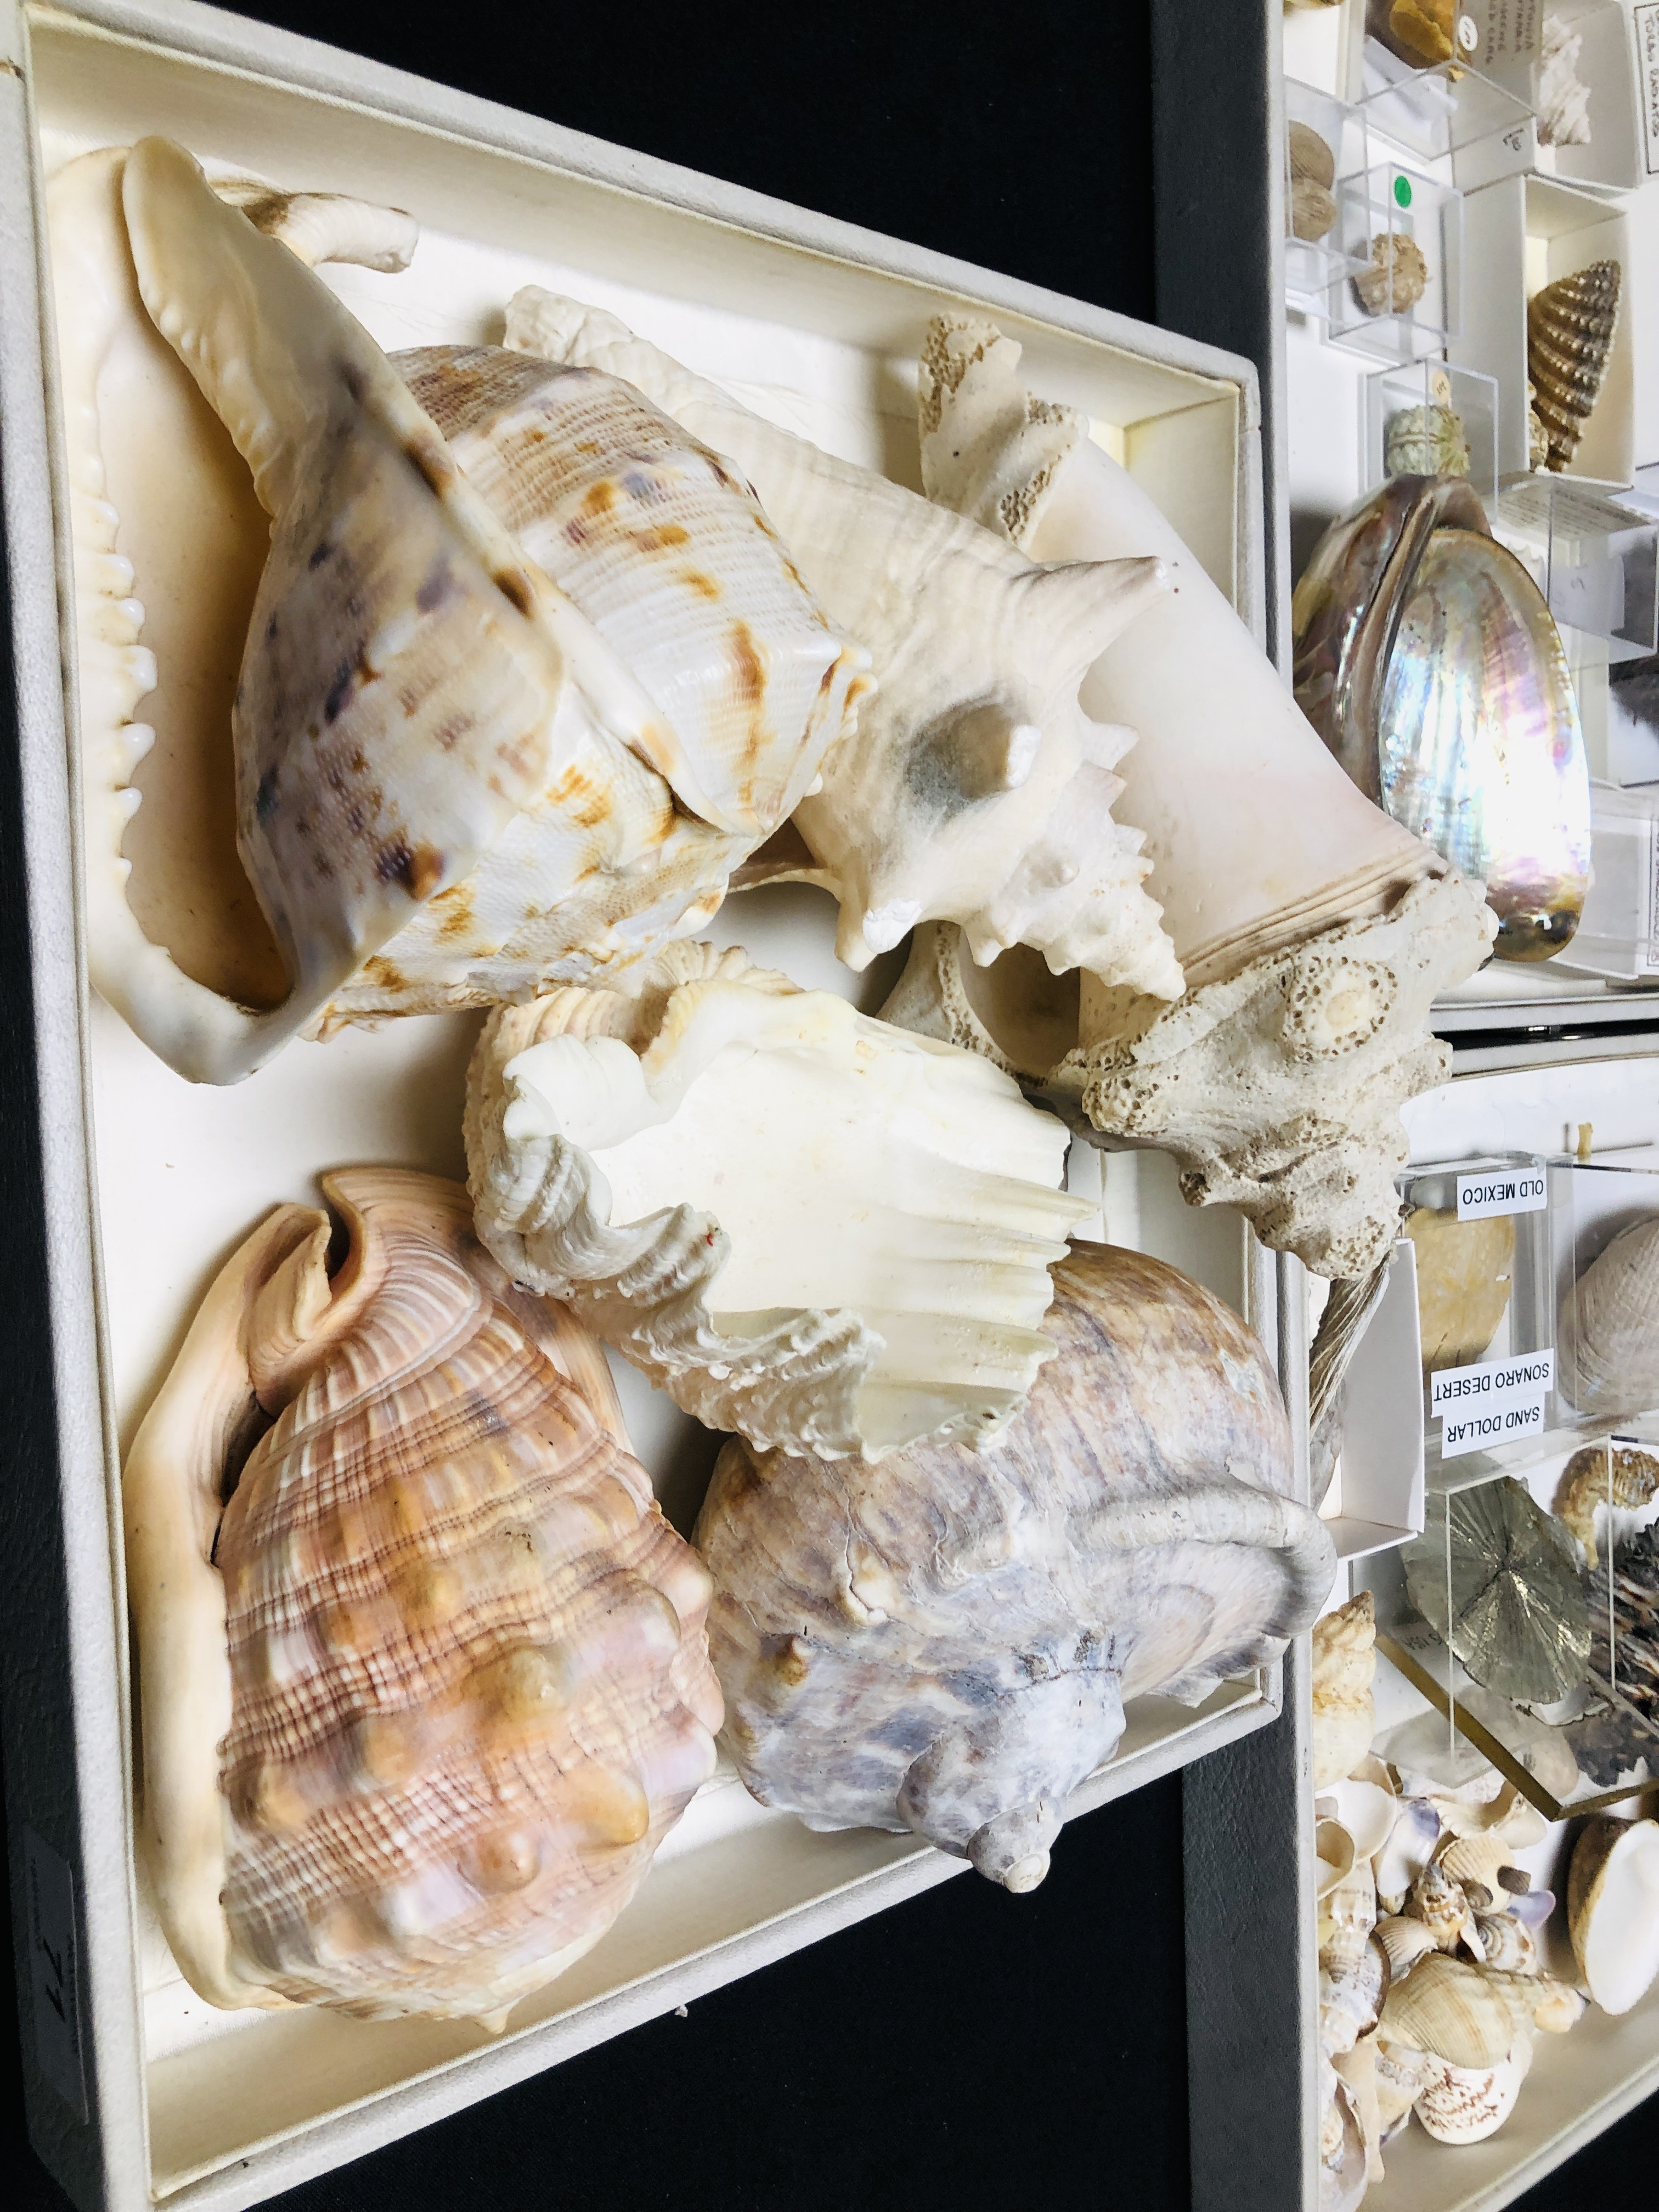 3 X TRAYS OF VARIOUS SEA SHELLS AND URCHINS TO INCLUDE PARECHINIDALE, SAND DOLLAR, SEAHORSES ETC. - Image 2 of 5